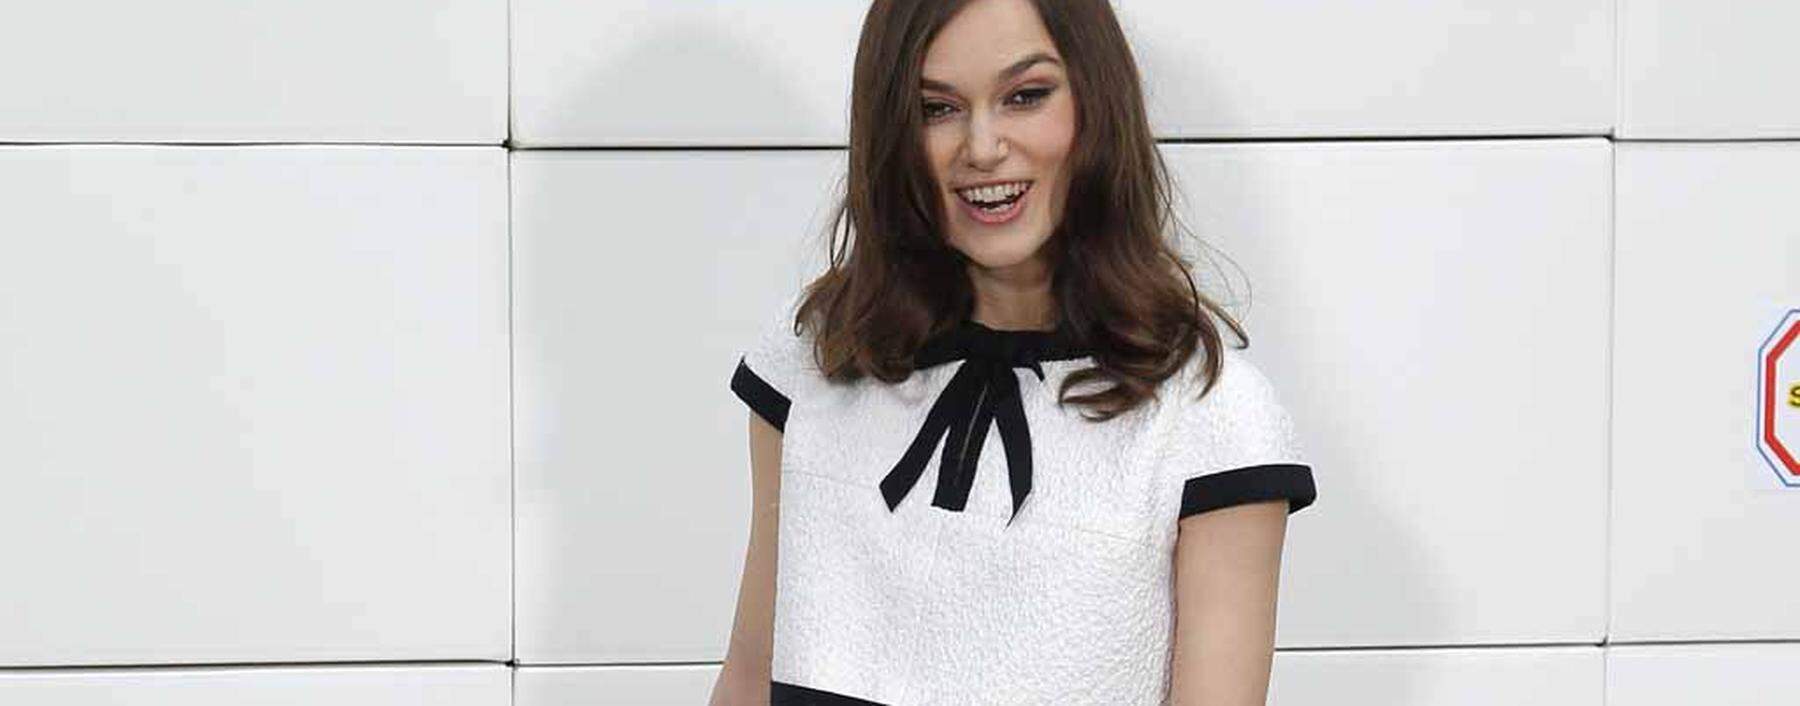 Actress Keira Knightley poses before the German designer Karl Lagerfeld Fall/Winter 2014-2015 women´s ready-to-wear collection show for French fashion house Chanel during Paris Fashion Week